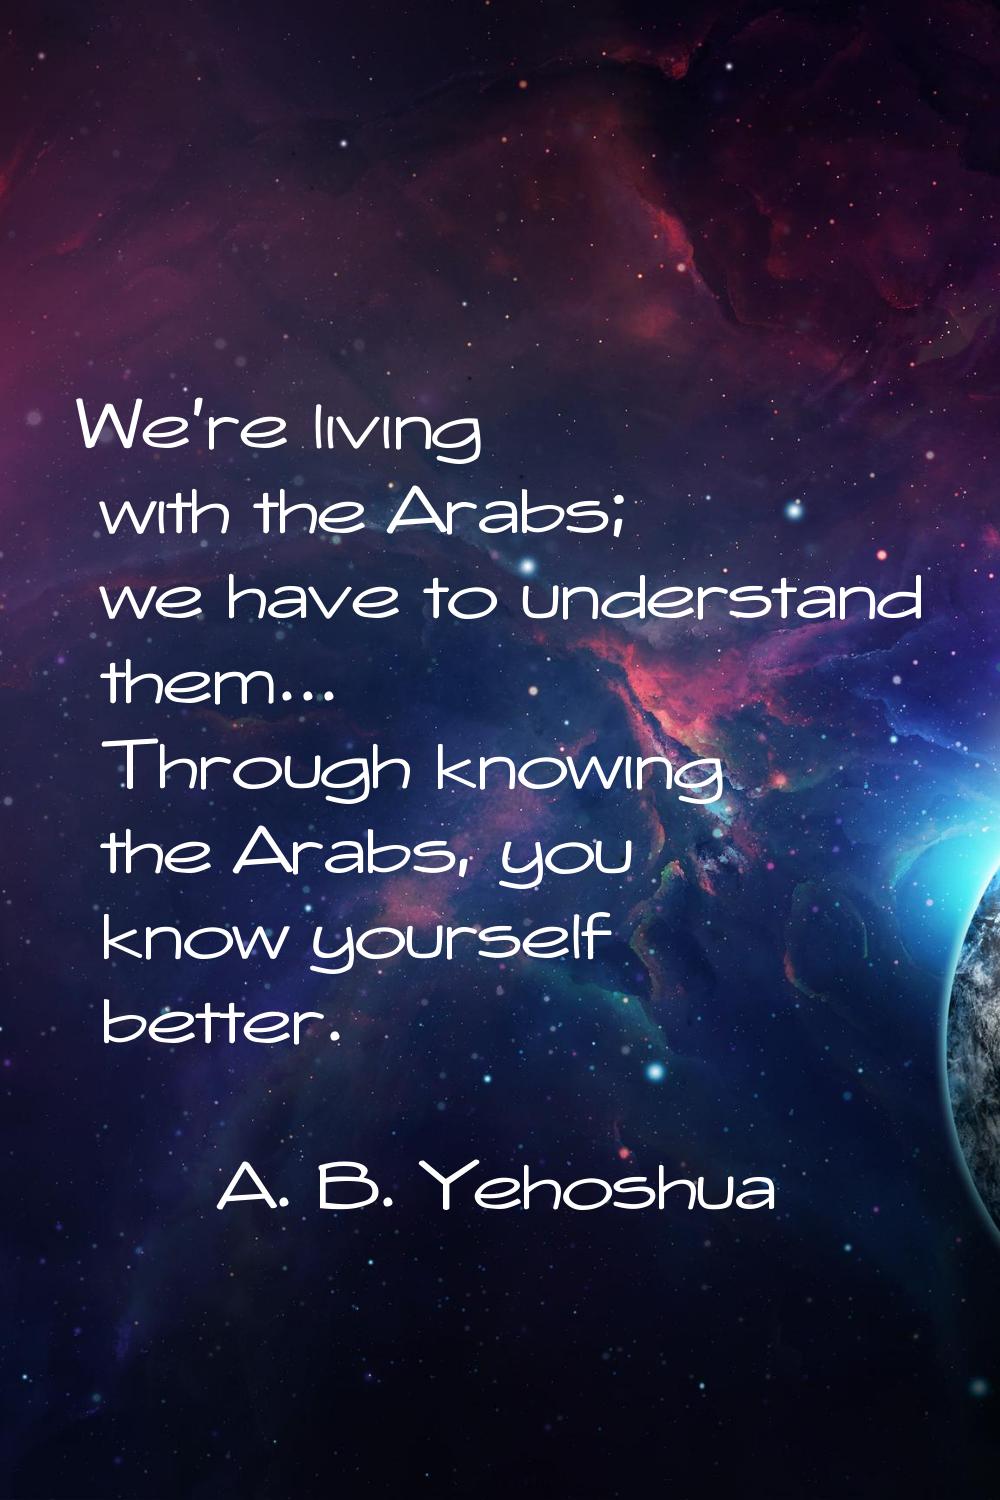 We're living with the Arabs; we have to understand them... Through knowing the Arabs, you know your